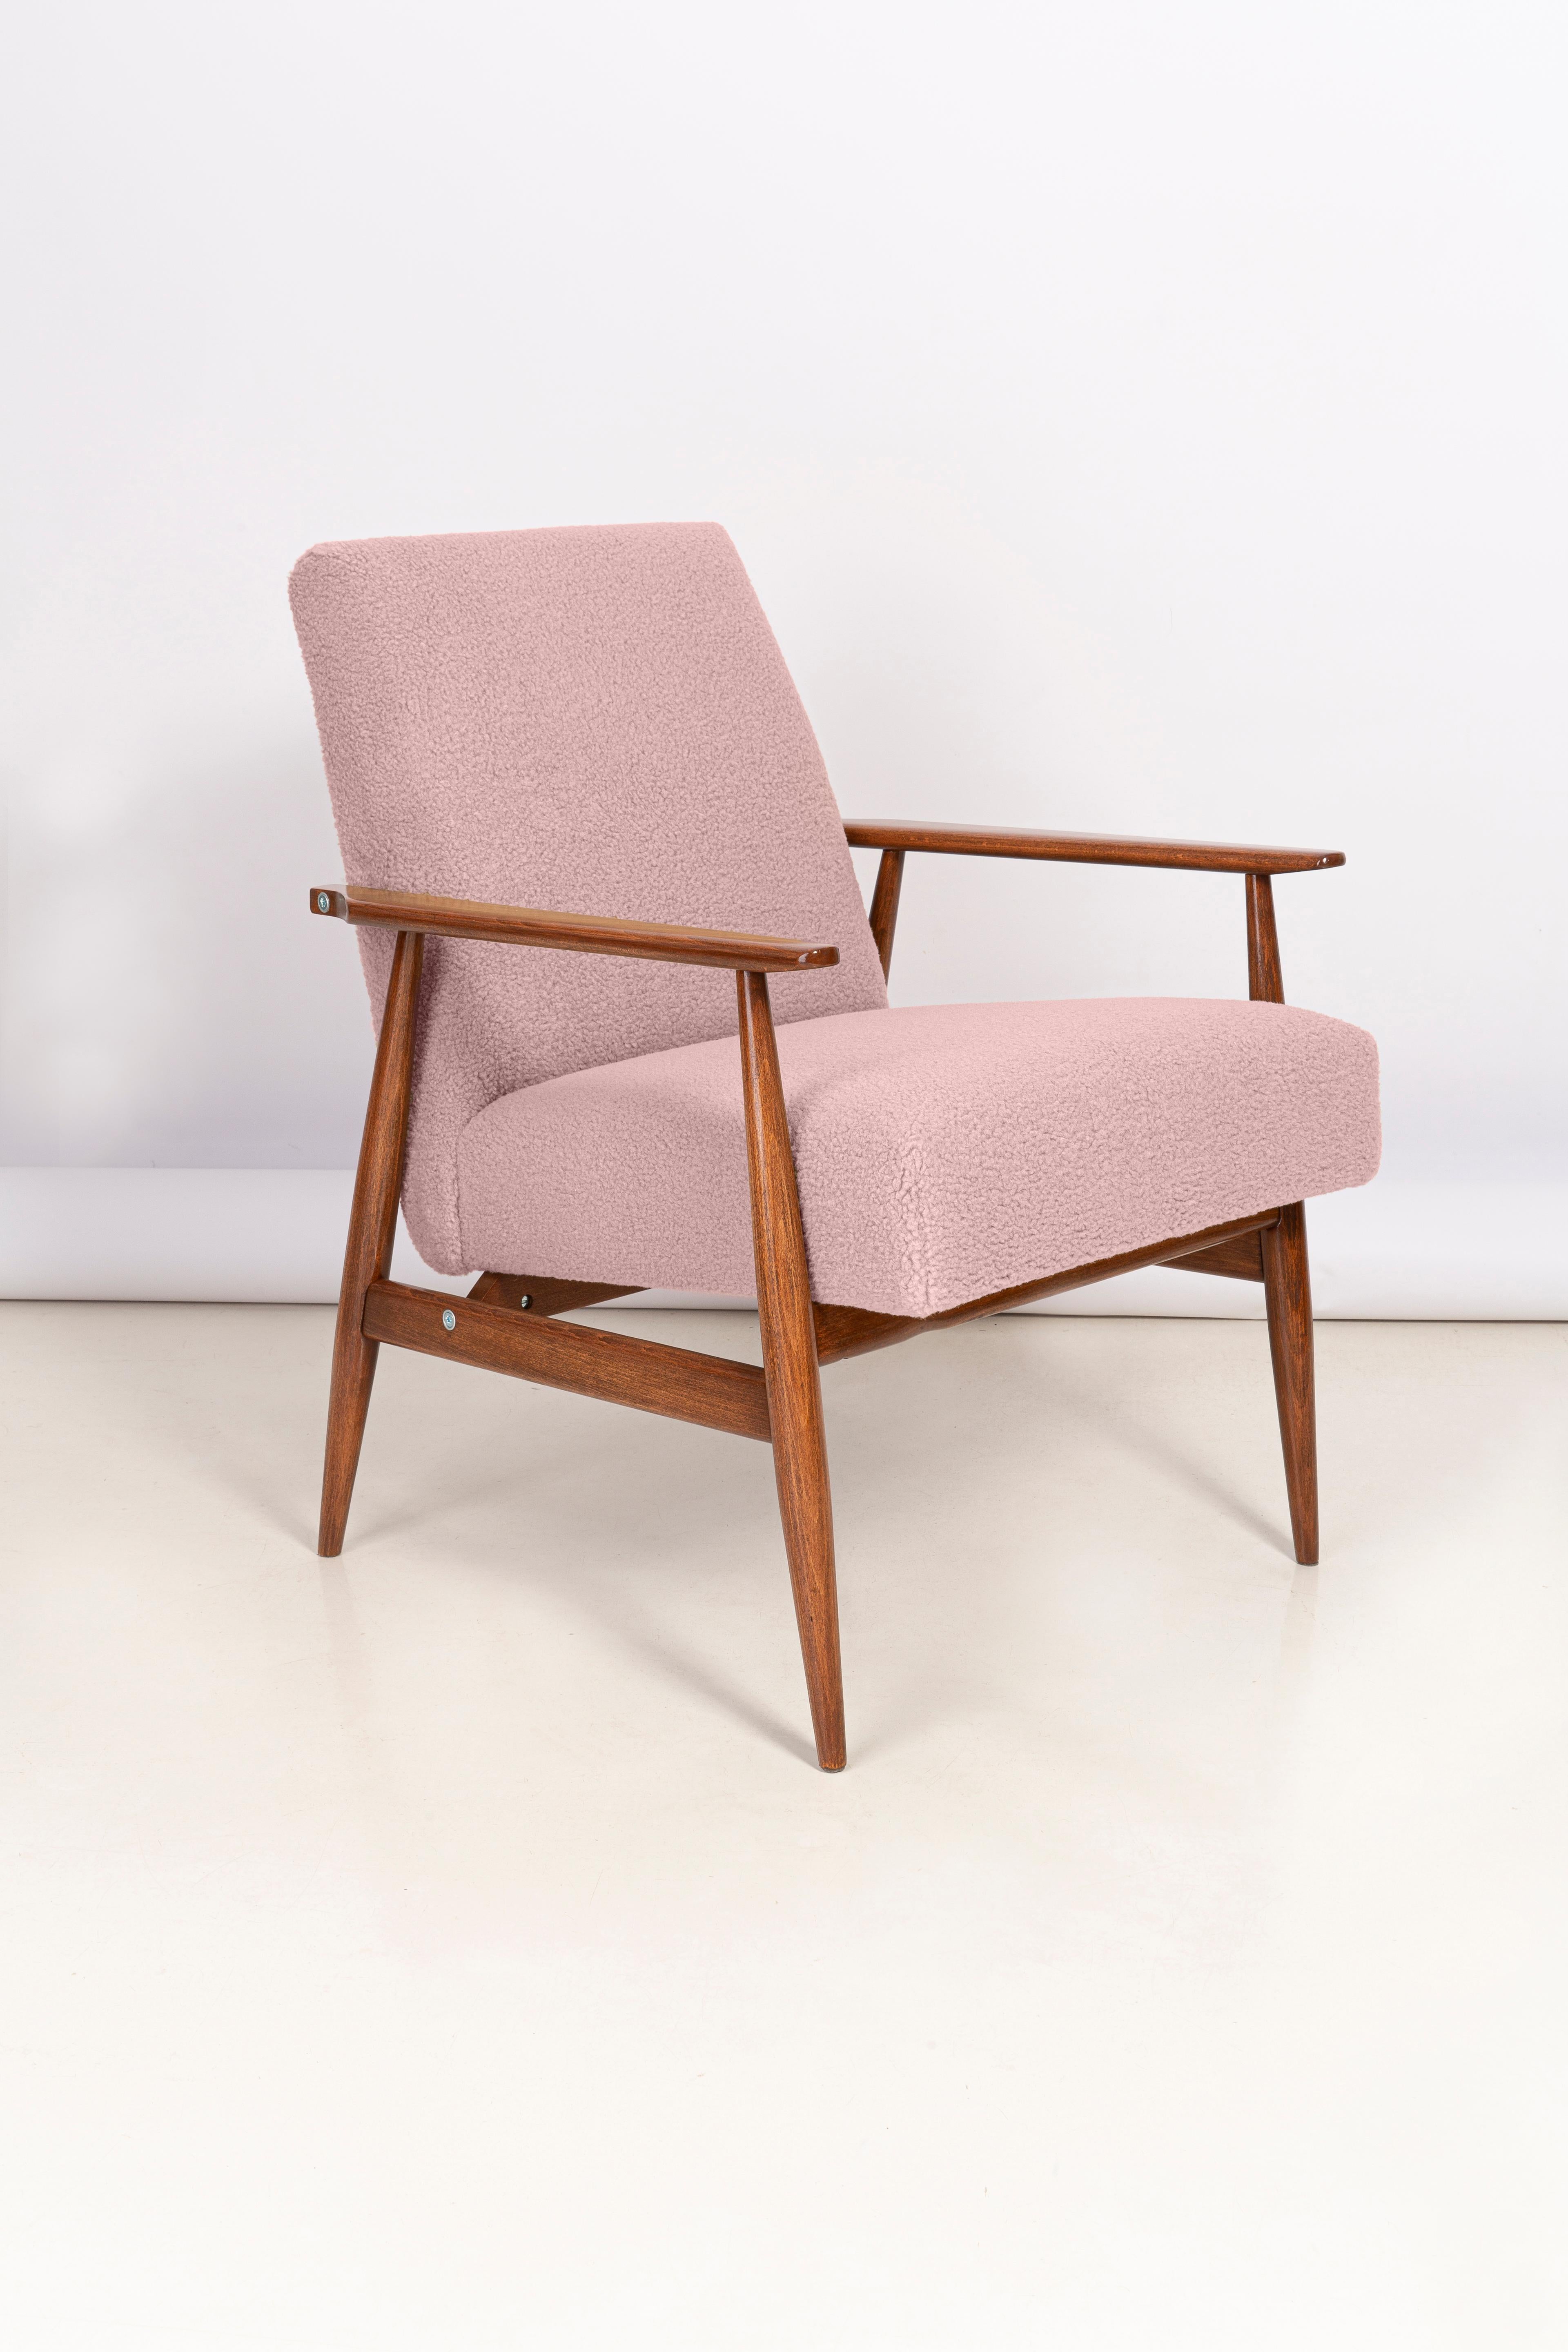 Pair of Dusty Pink Bouclé Dante Armchairs, H. Lis, Europe, 1960s For Sale 3